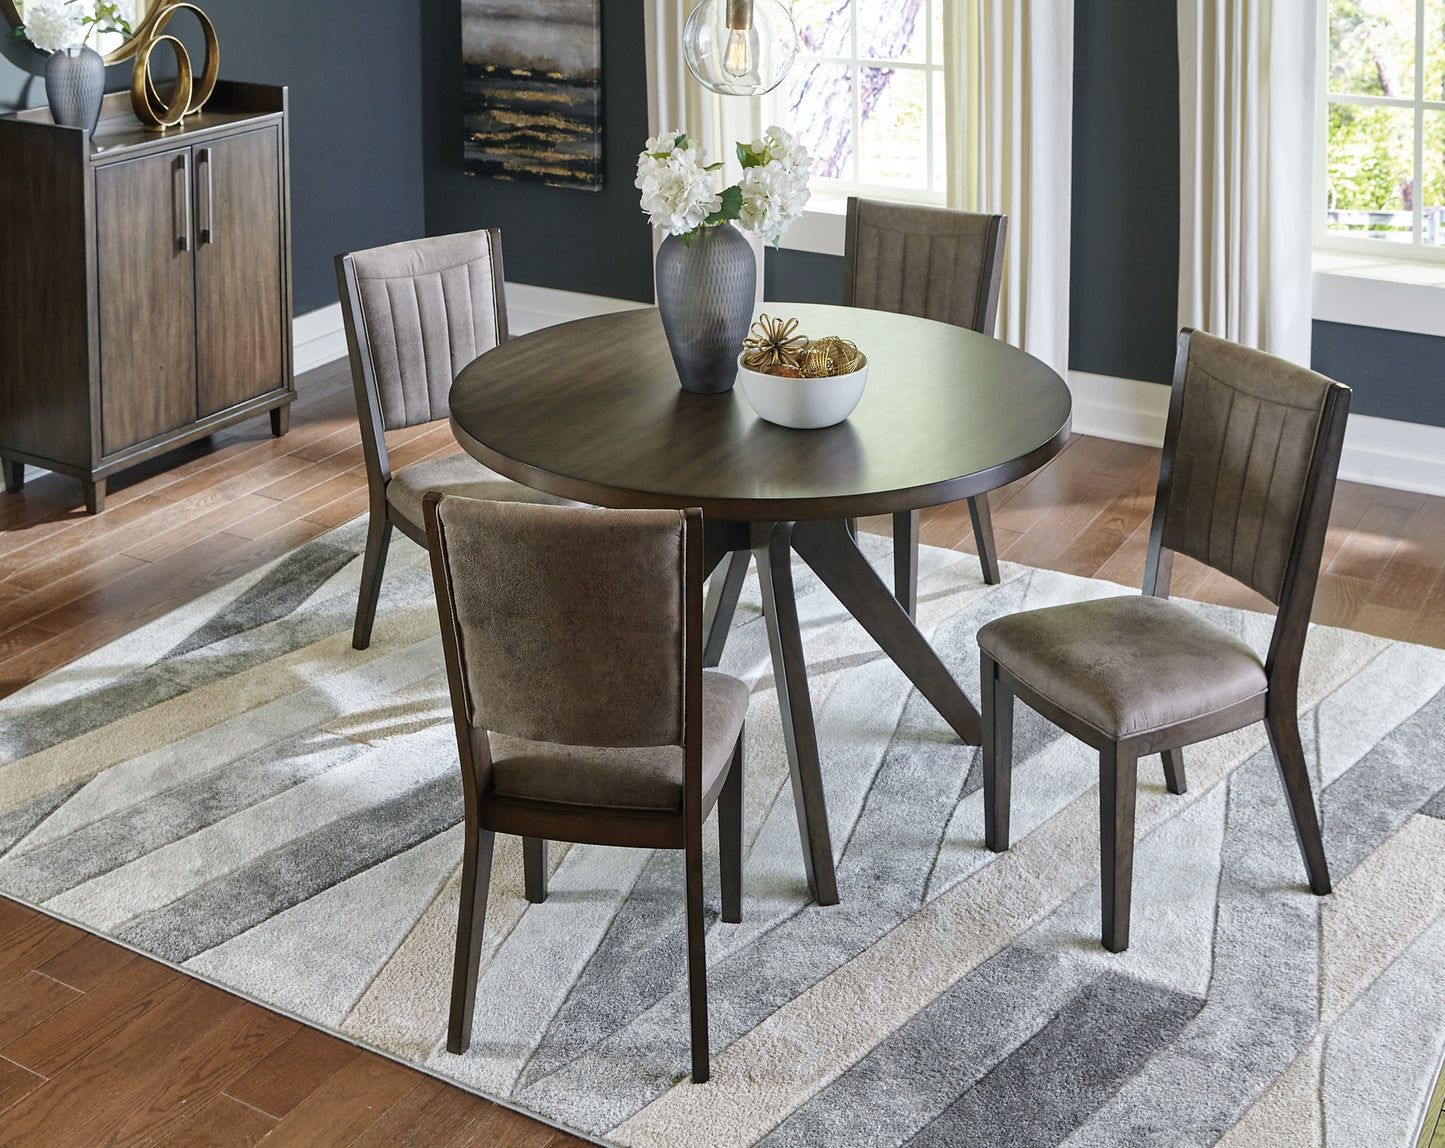 Wittland Dining Table and 4 Chairs